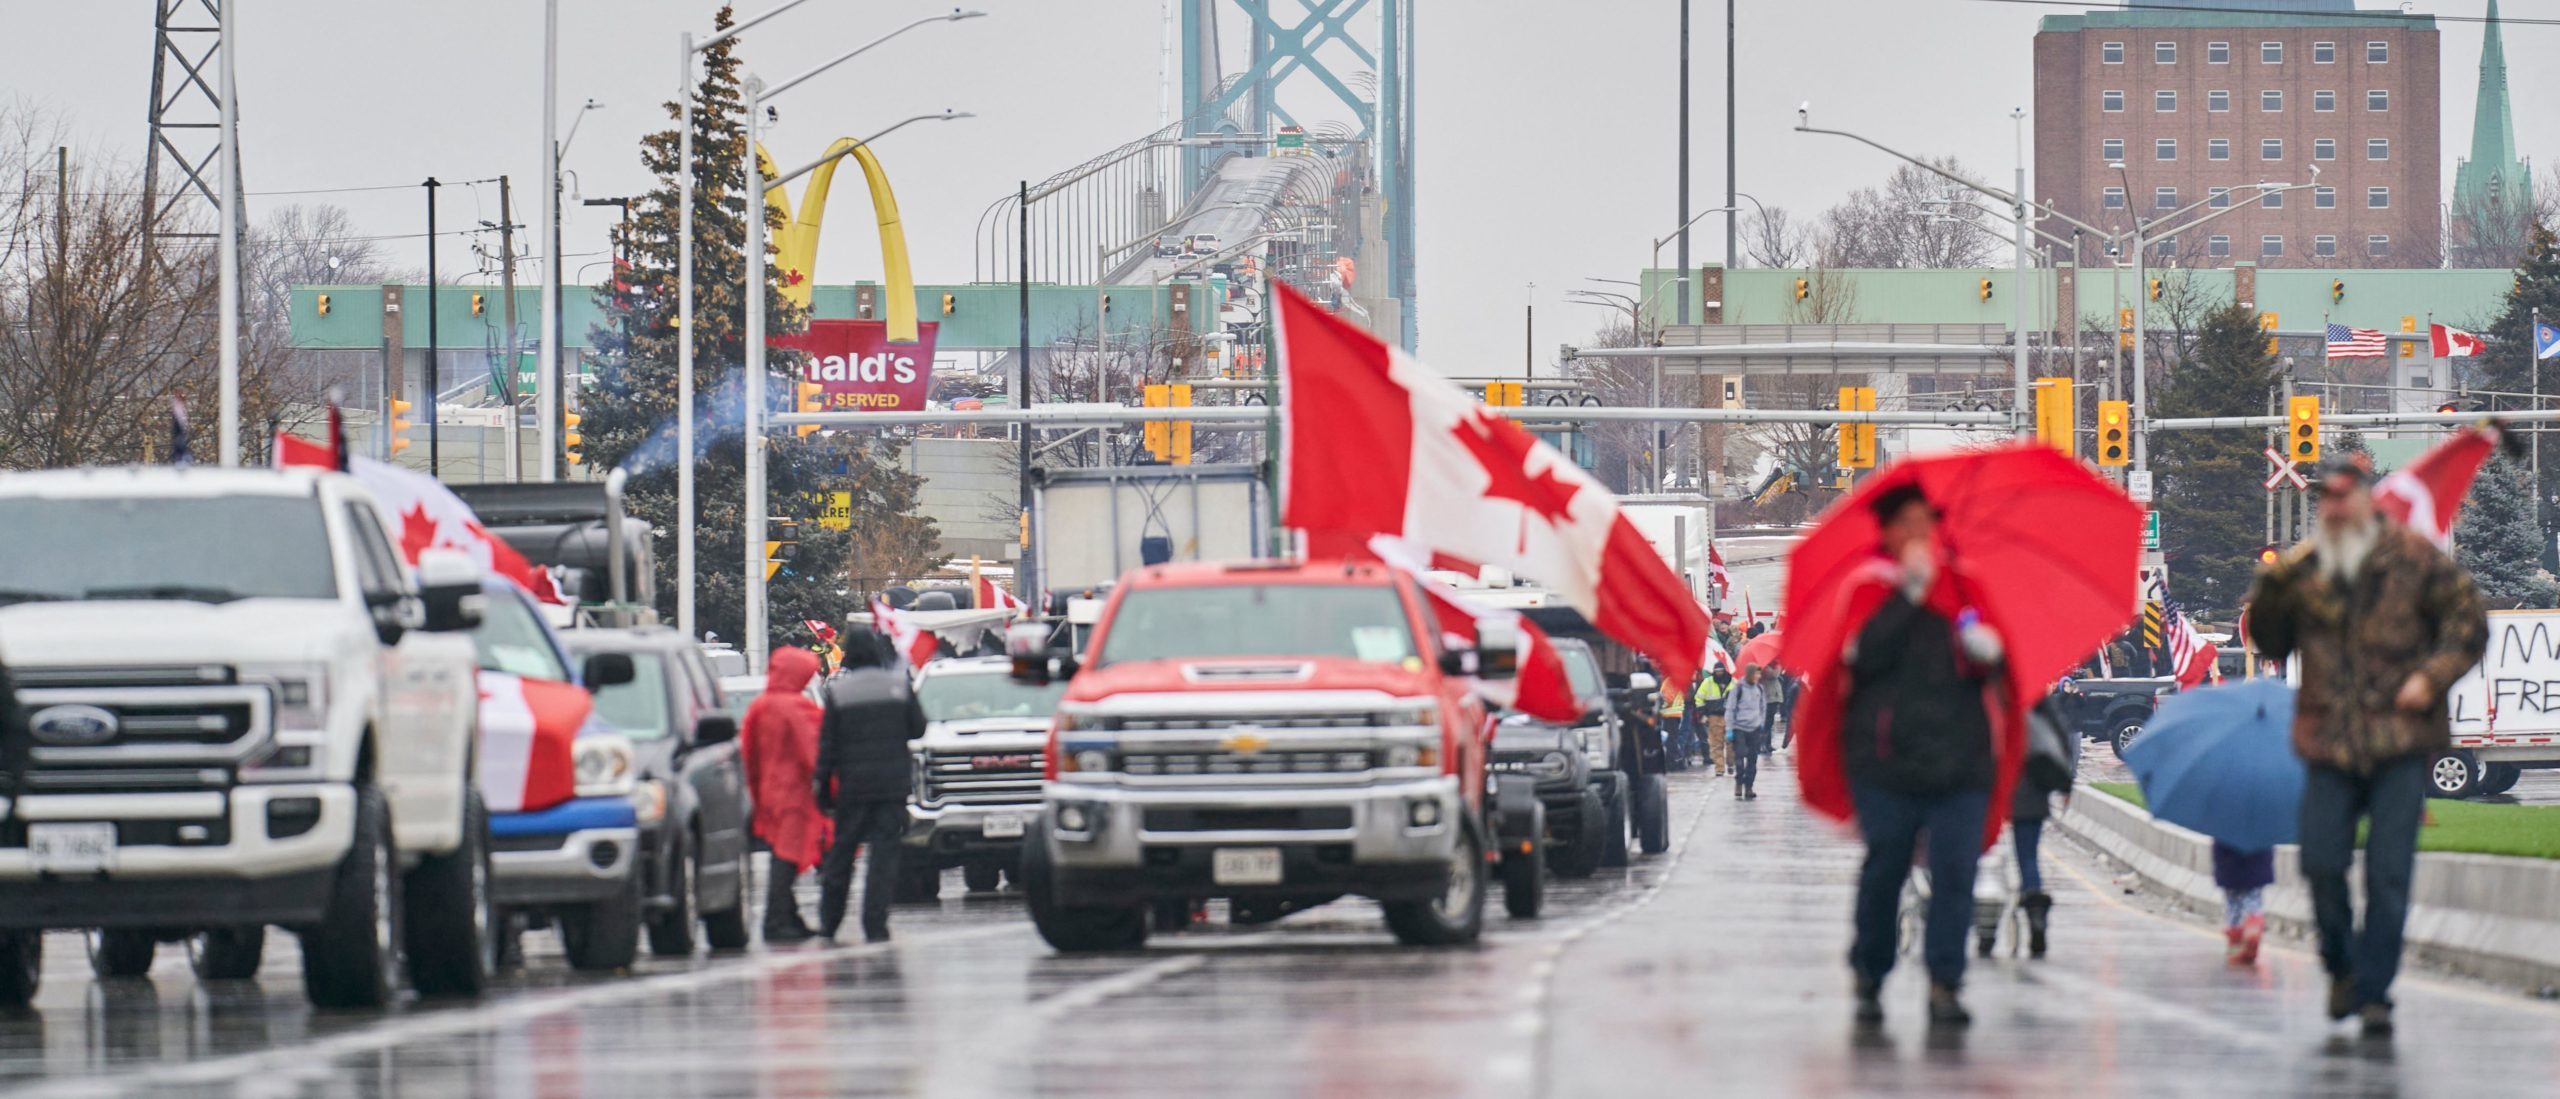 Anti-vaccine mandate protestors block the roadway at the Ambassador Bridge border crossing, in Windsor, Ontario, Canada on February 11, 2022. - The protestors who are in support of the Truckers Freedom Convoy in Ottawa have blocked traffic in the Canada bound lanes from the bridge since February 7, 2022.